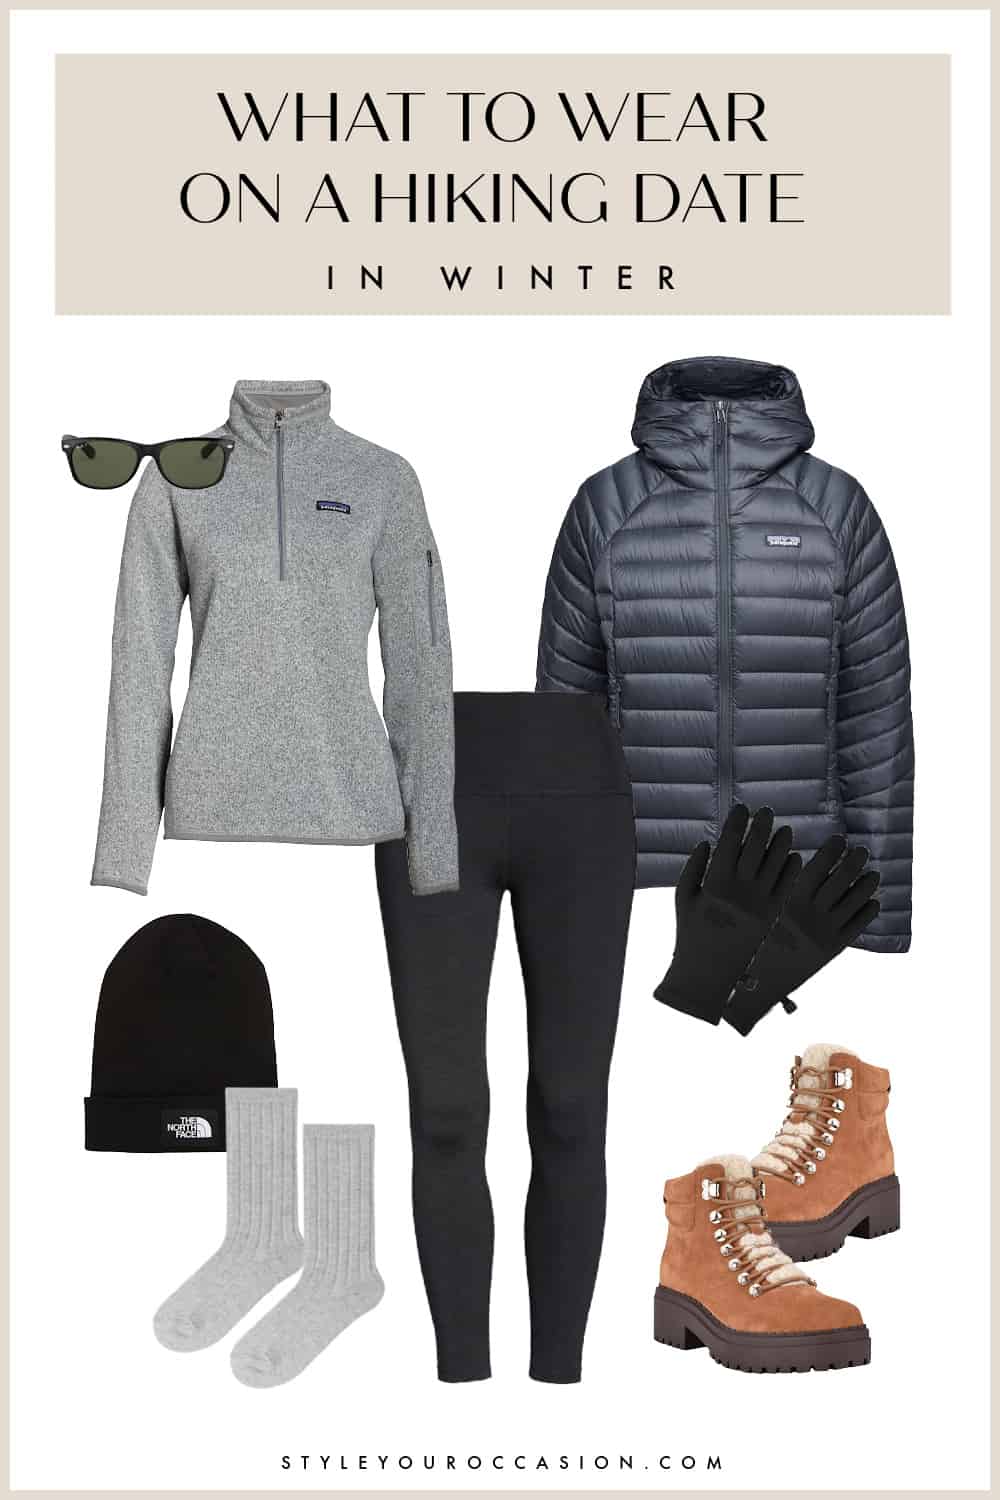 outfit collage for what to wear on a hiking date in the the winter with a down puffer jacket, thermal pullover, leggings, hiking boots, wool socks, thermal gloves, and toque